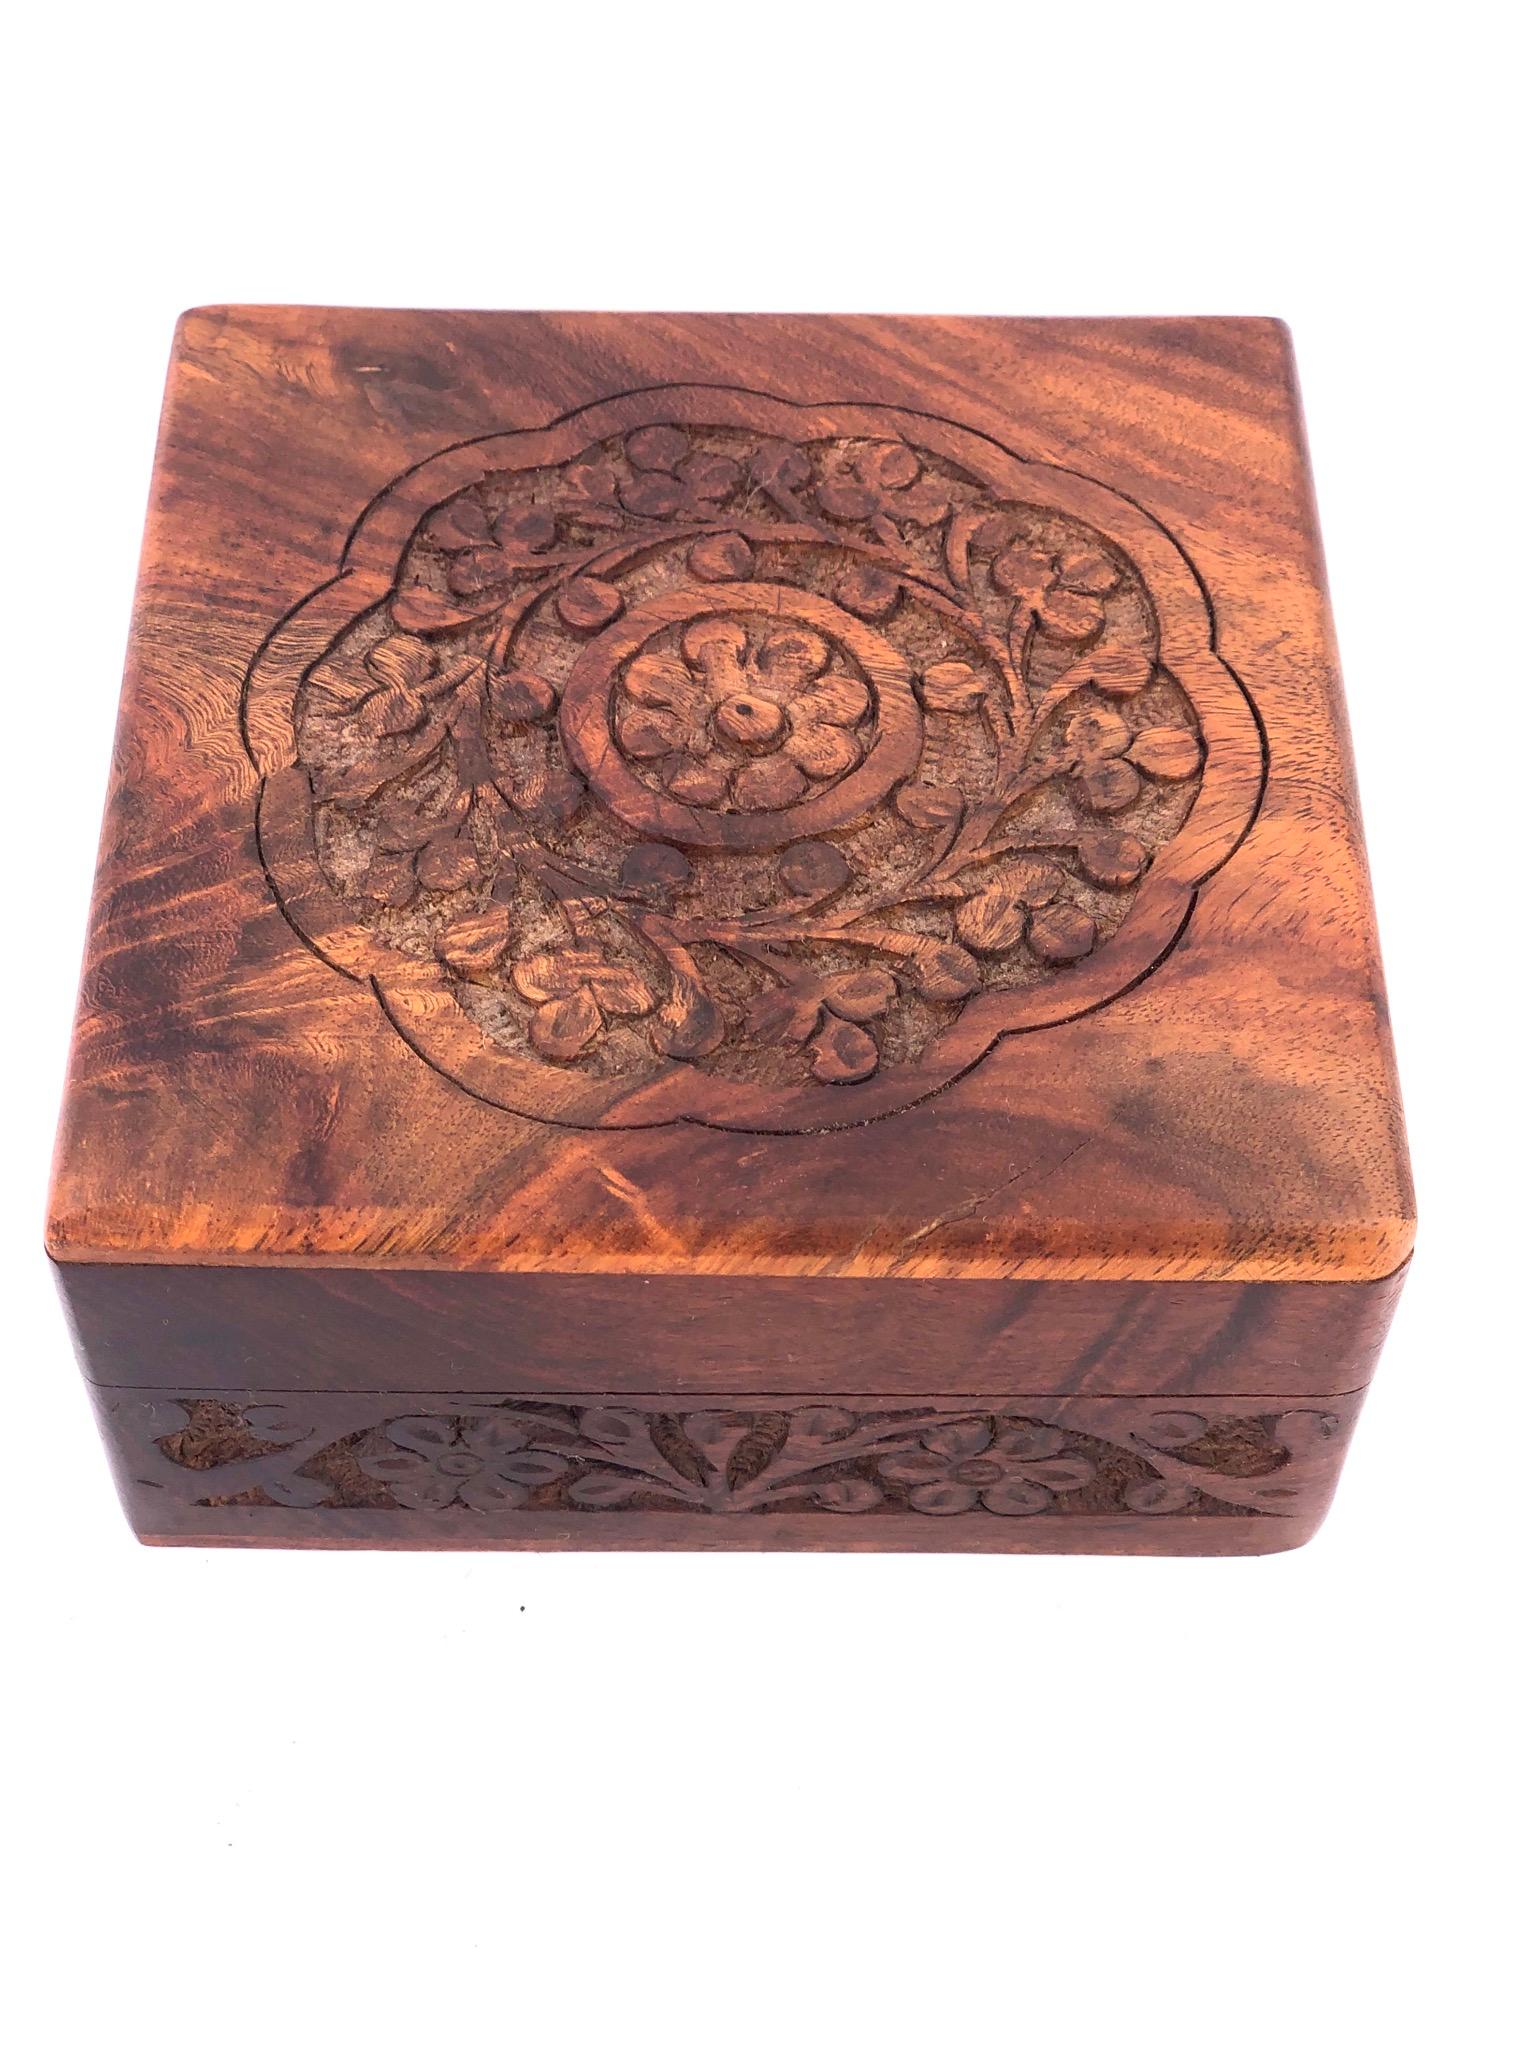 Nicely hand carved rosewood square box in rosewood well-done piece in beautiful wood.